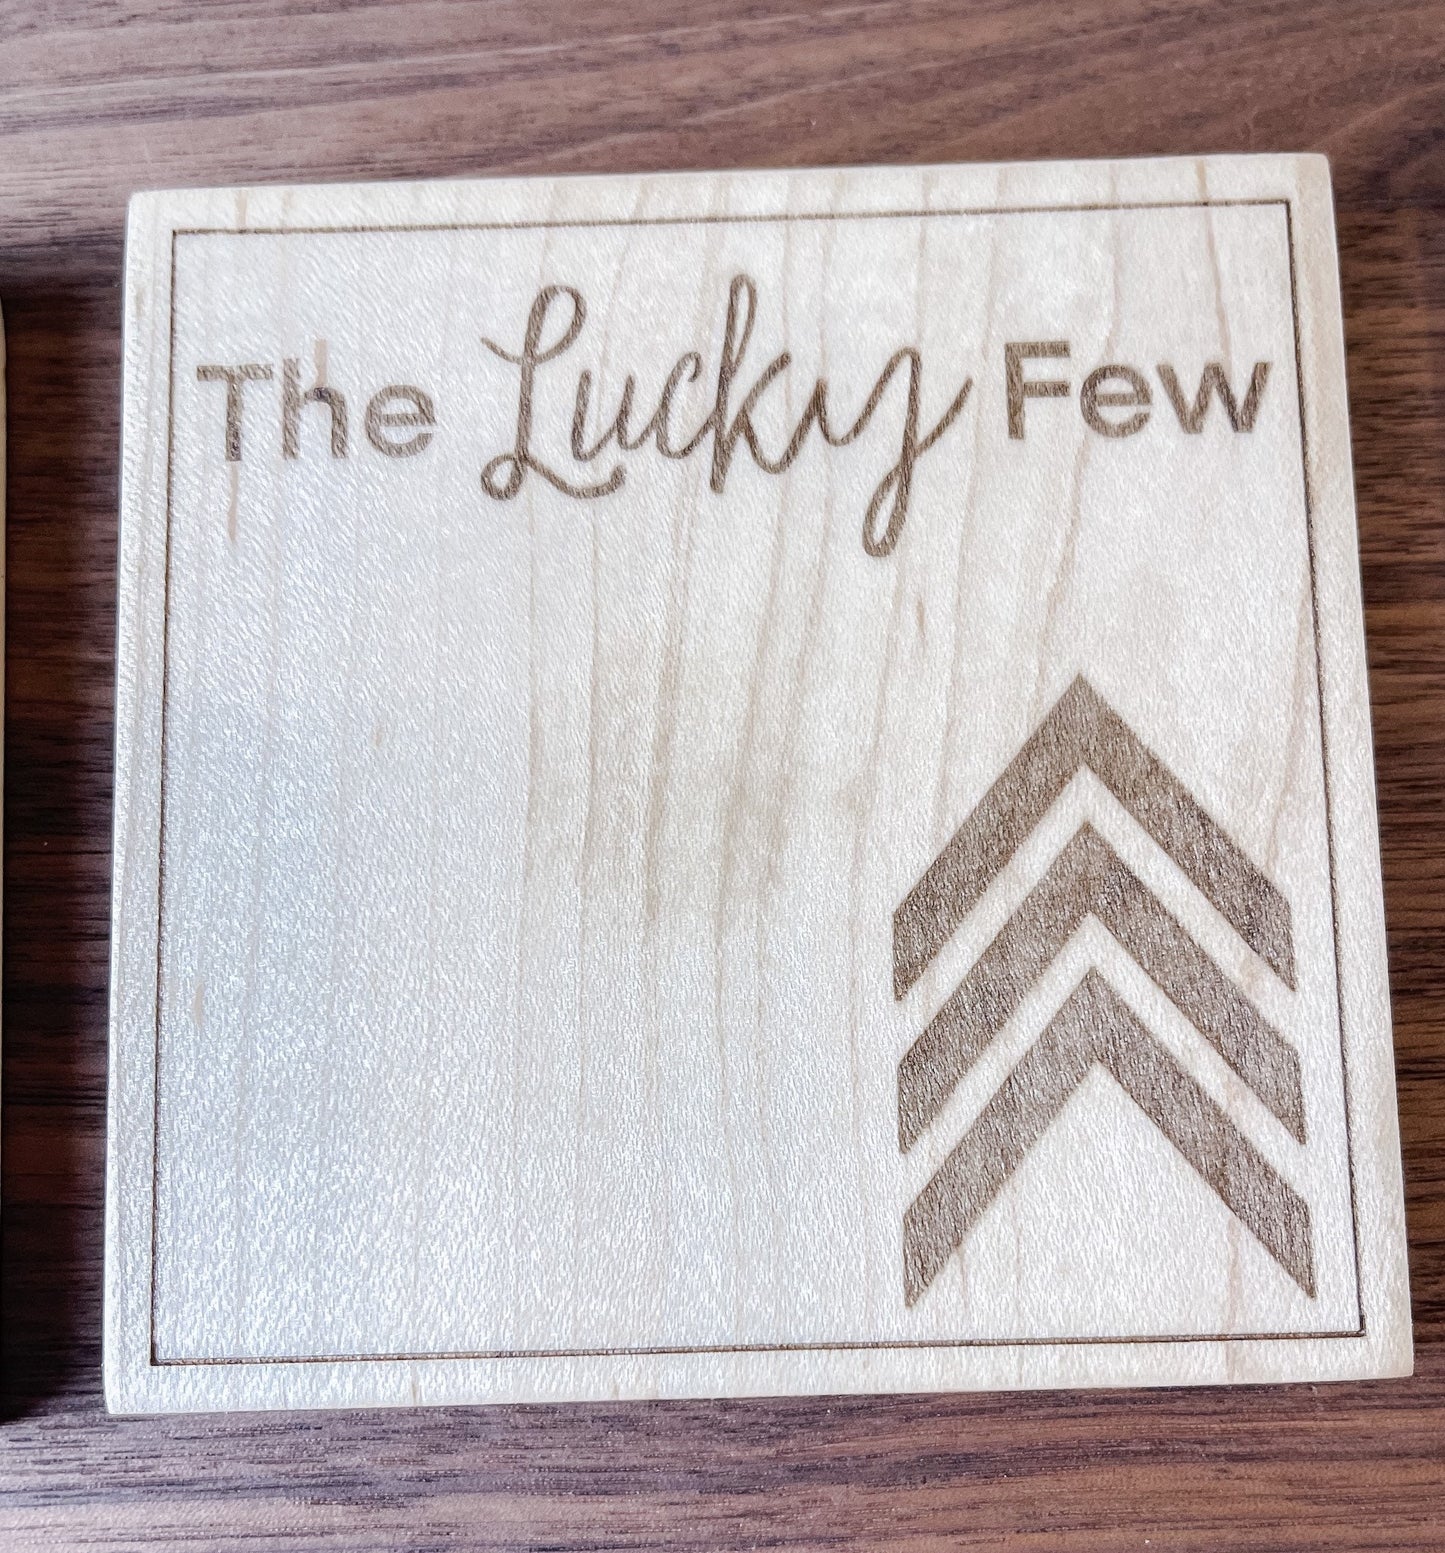 wood coasters | Down syndrome awareness | Advocate Coasters | maple coasters | wooden coasters | Custom Coasters | engraved coasters